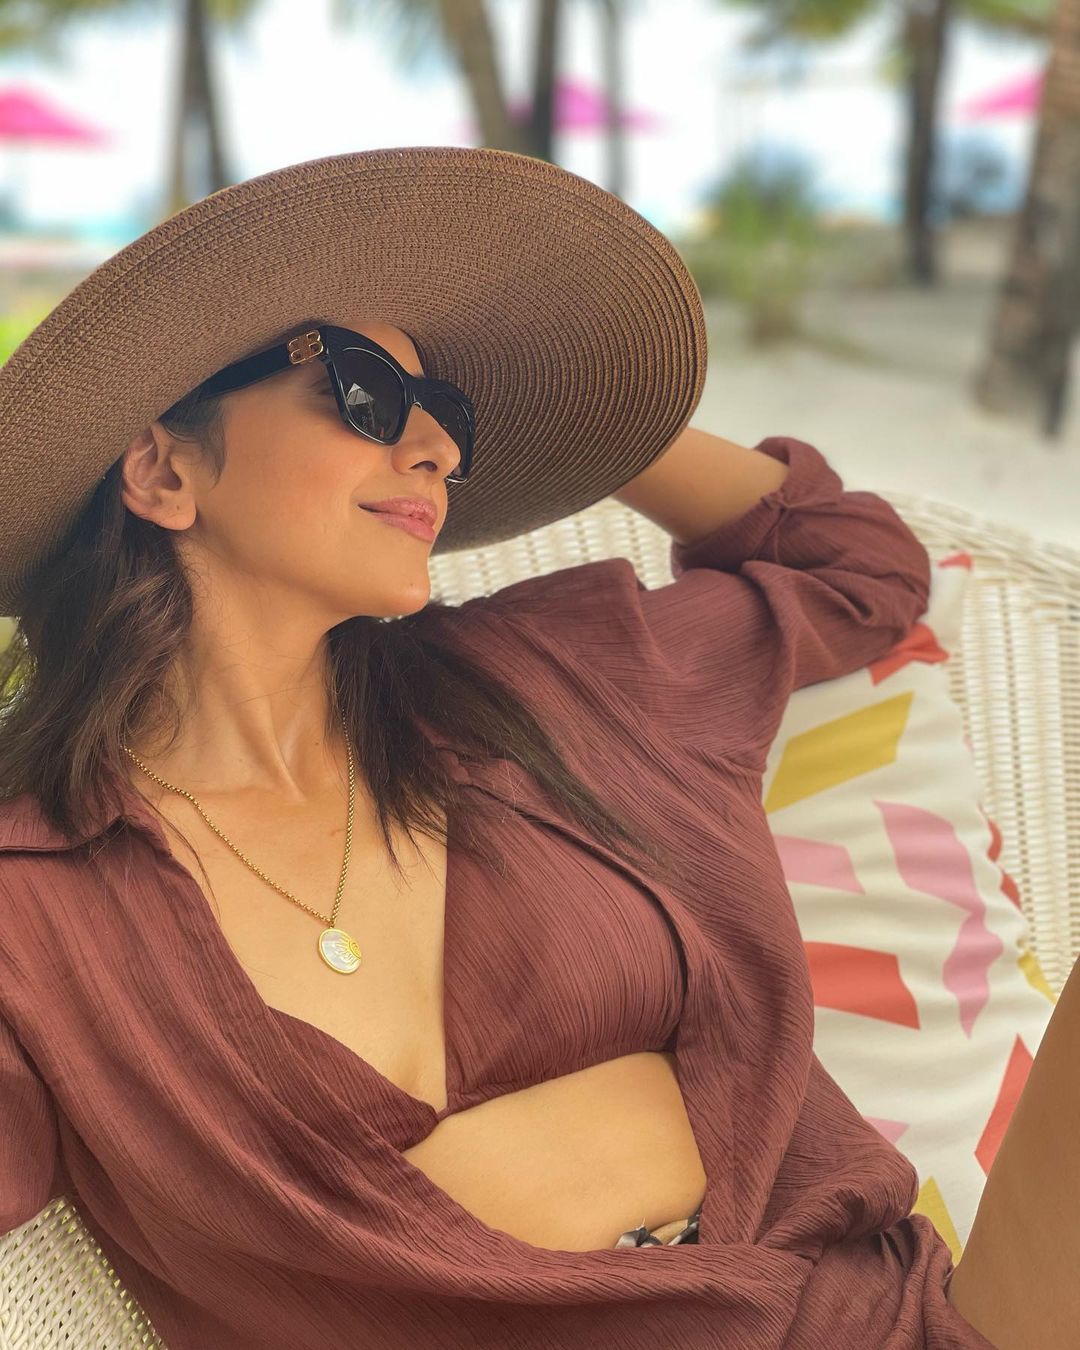 Rakul Preeti Sex Videos Rakul Preeti Sex Videos - Rakul Preet Singh Flaunts Toned Figure In Stylish Bikinis And Monokinis  During Vacay In Maldives, See Her Sexy Pictures - News18